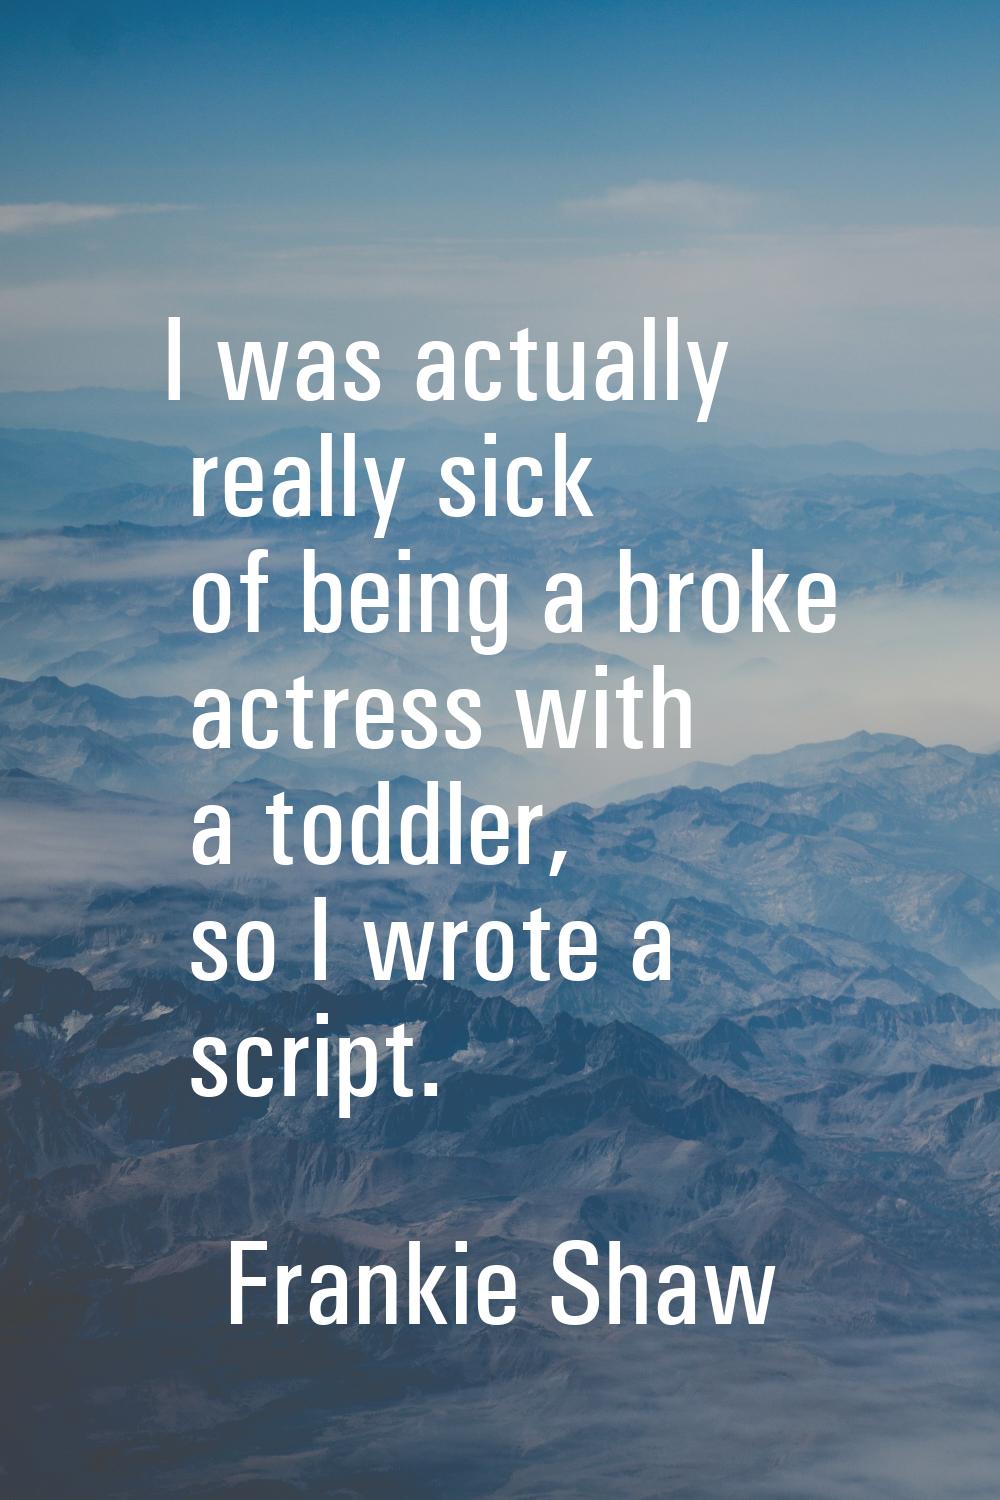 I was actually really sick of being a broke actress with a toddler, so I wrote a script.